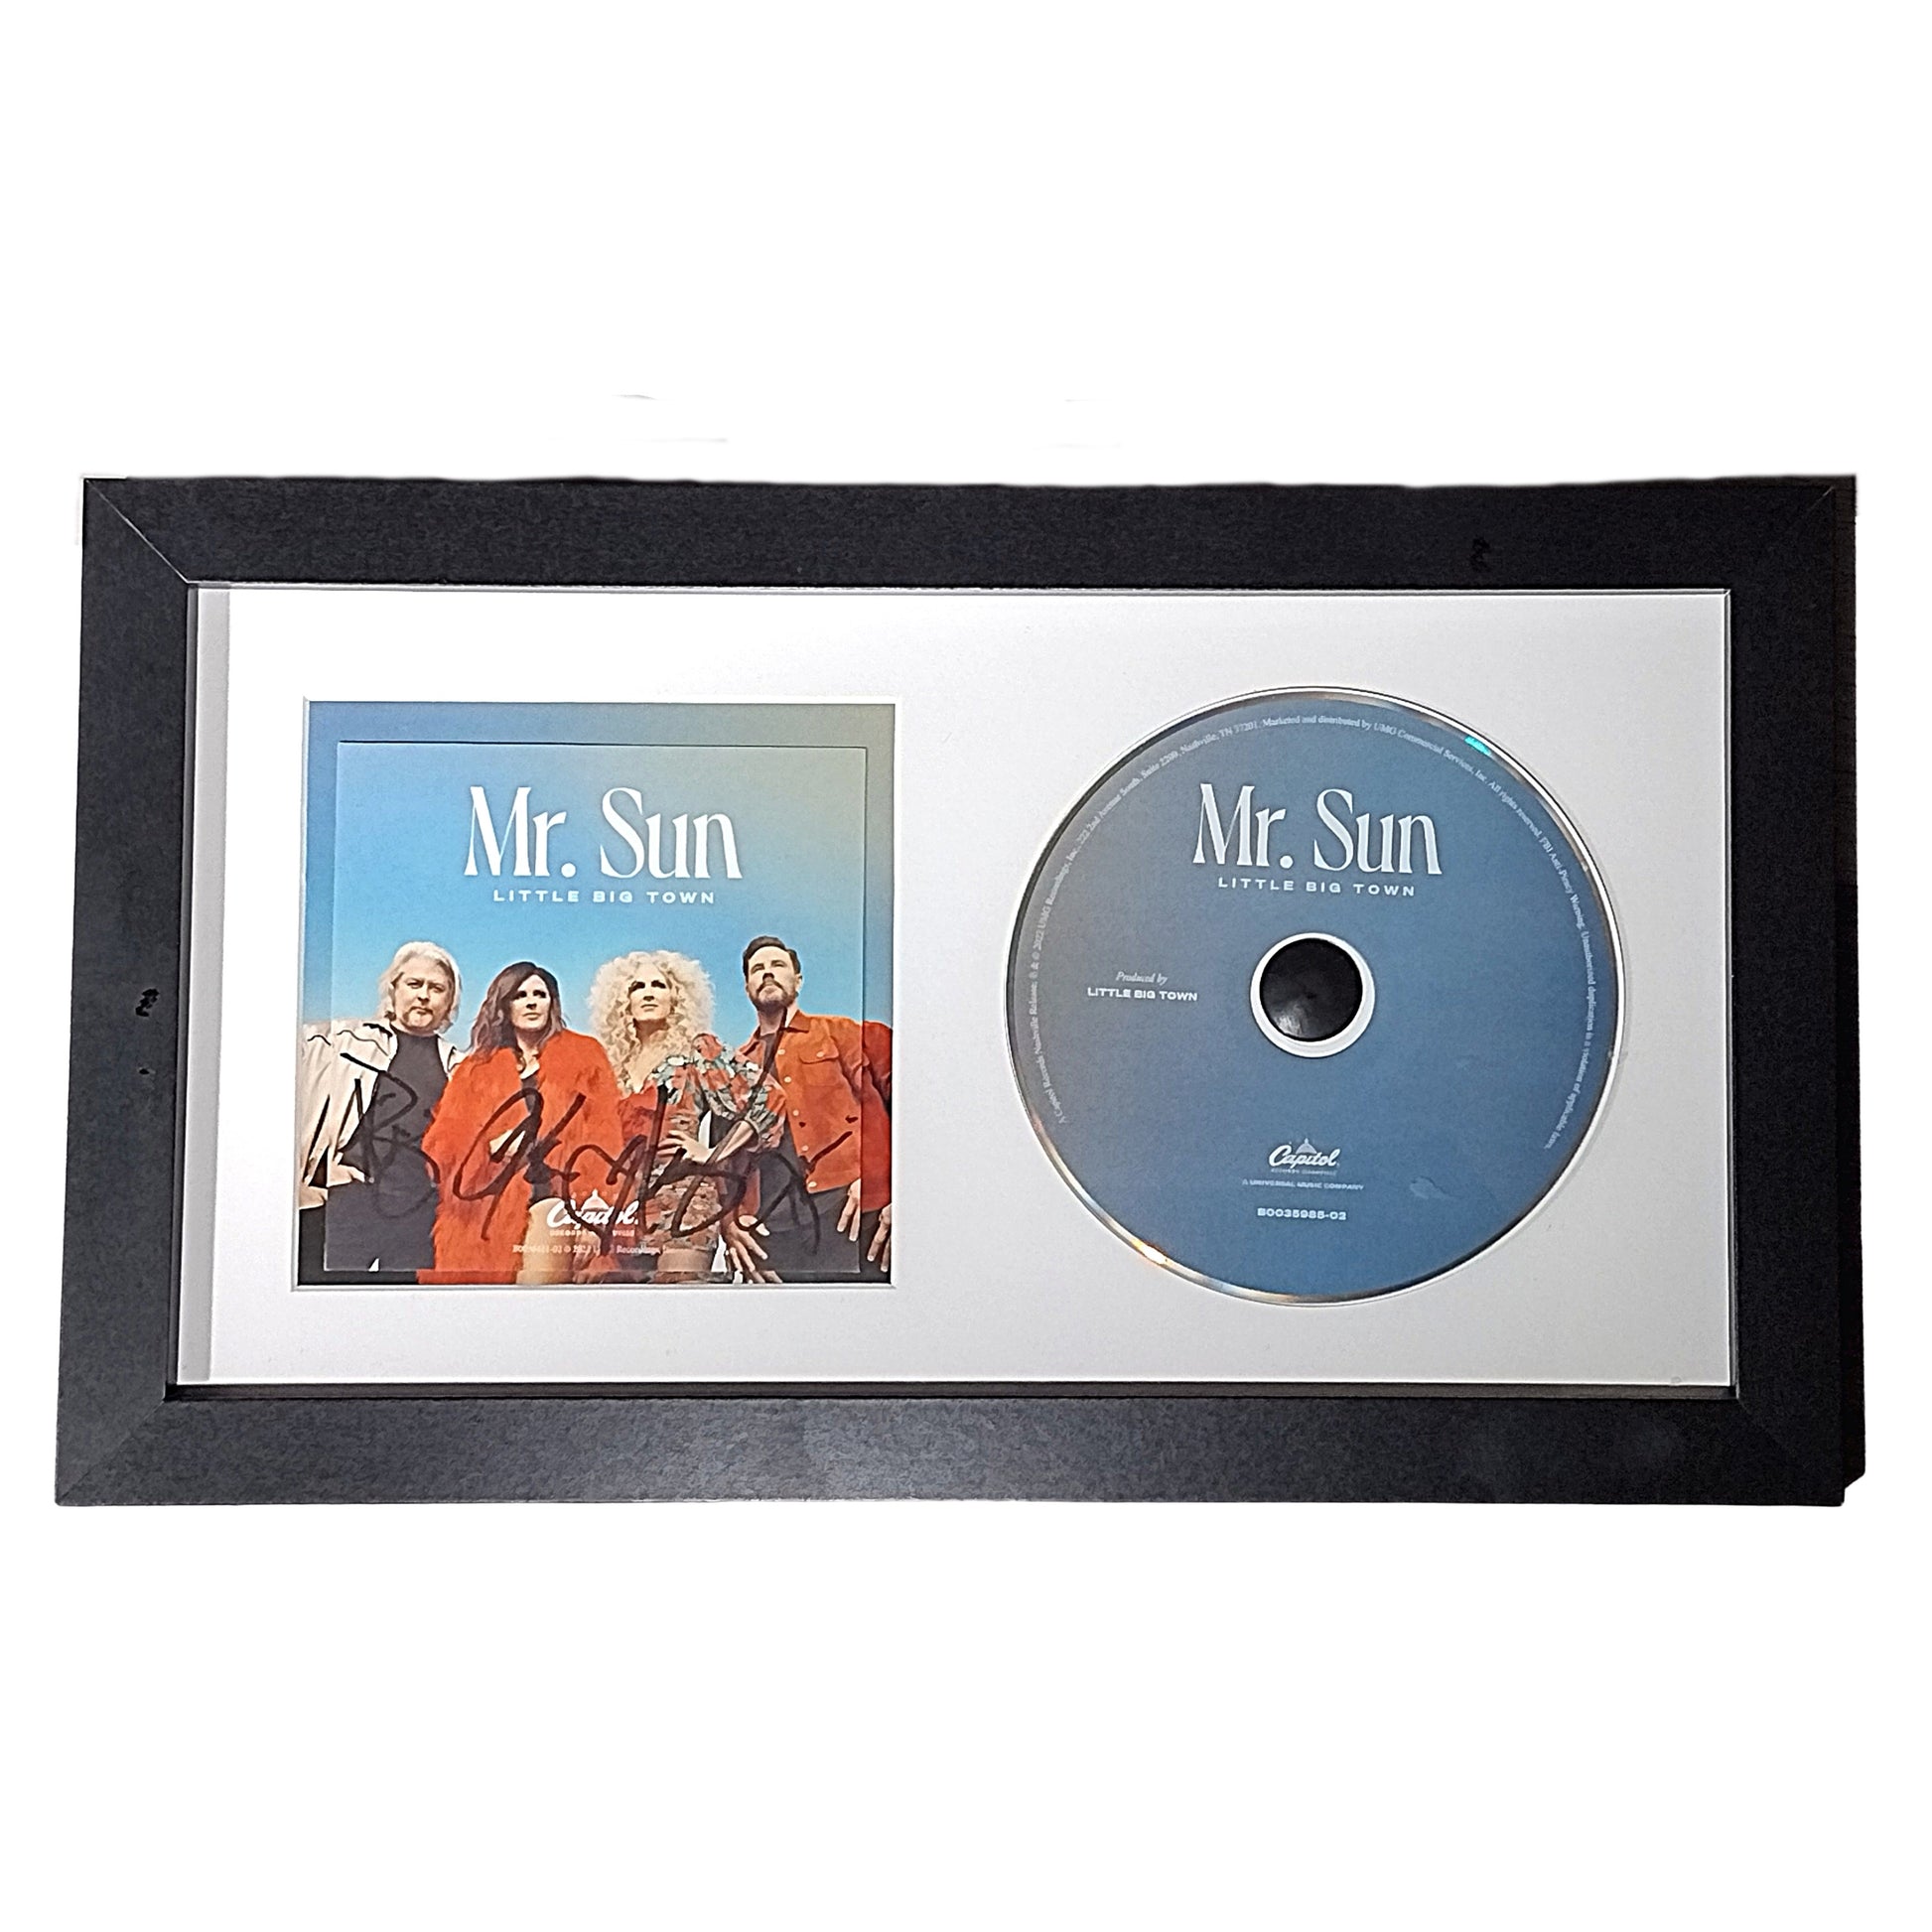 Music- Autographed- Little Big Town Band Signed Mr Sun CD Cover Insert Framed and Matted Wall Display Beckett Certified Authentic AB86943 - 102